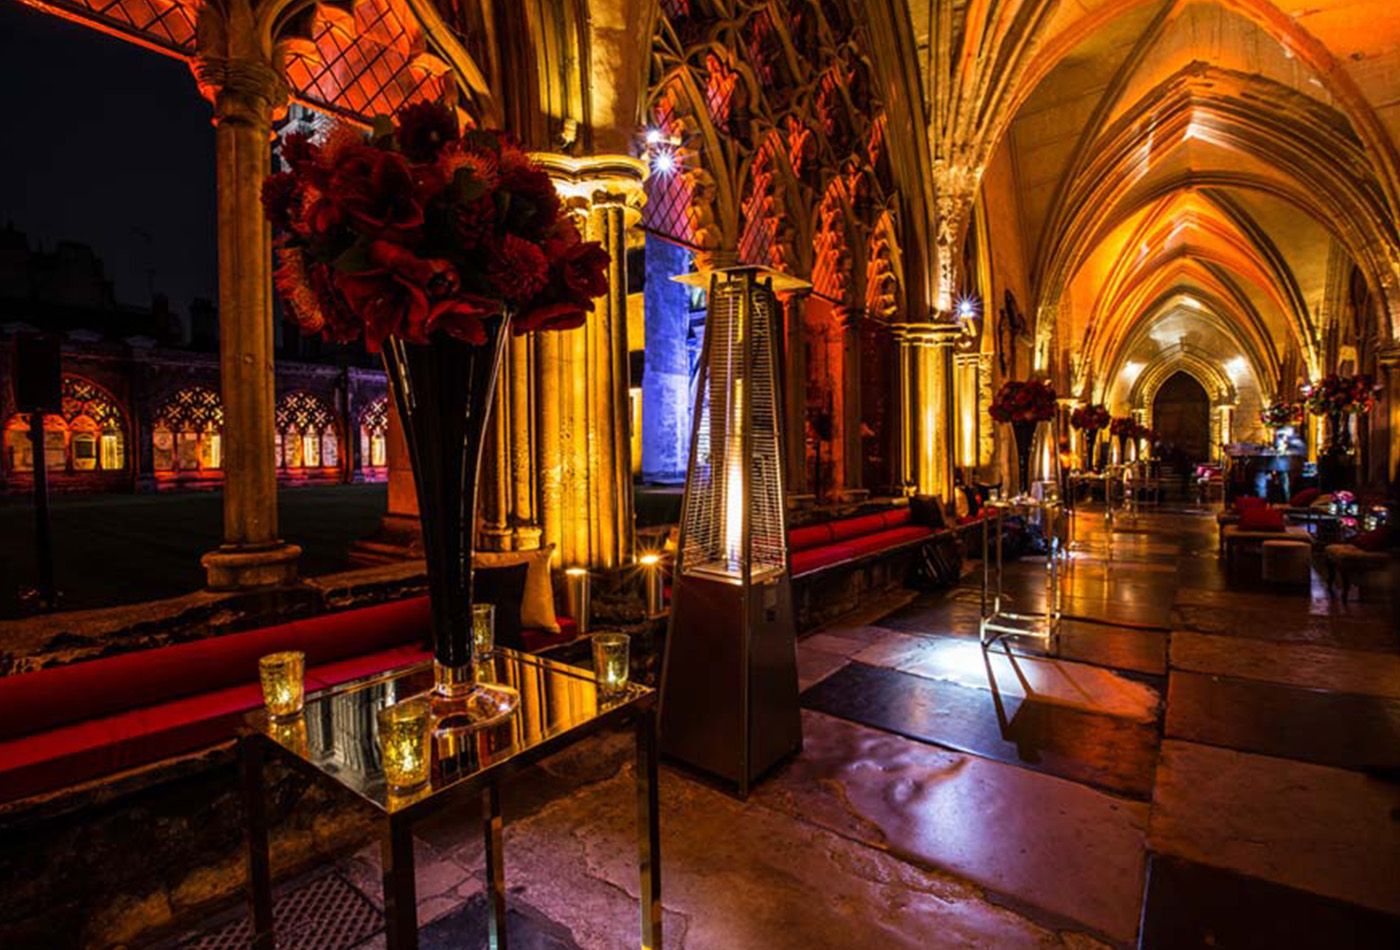 The main cloister at night, lit up with candles and decorated with red floral arrangements 